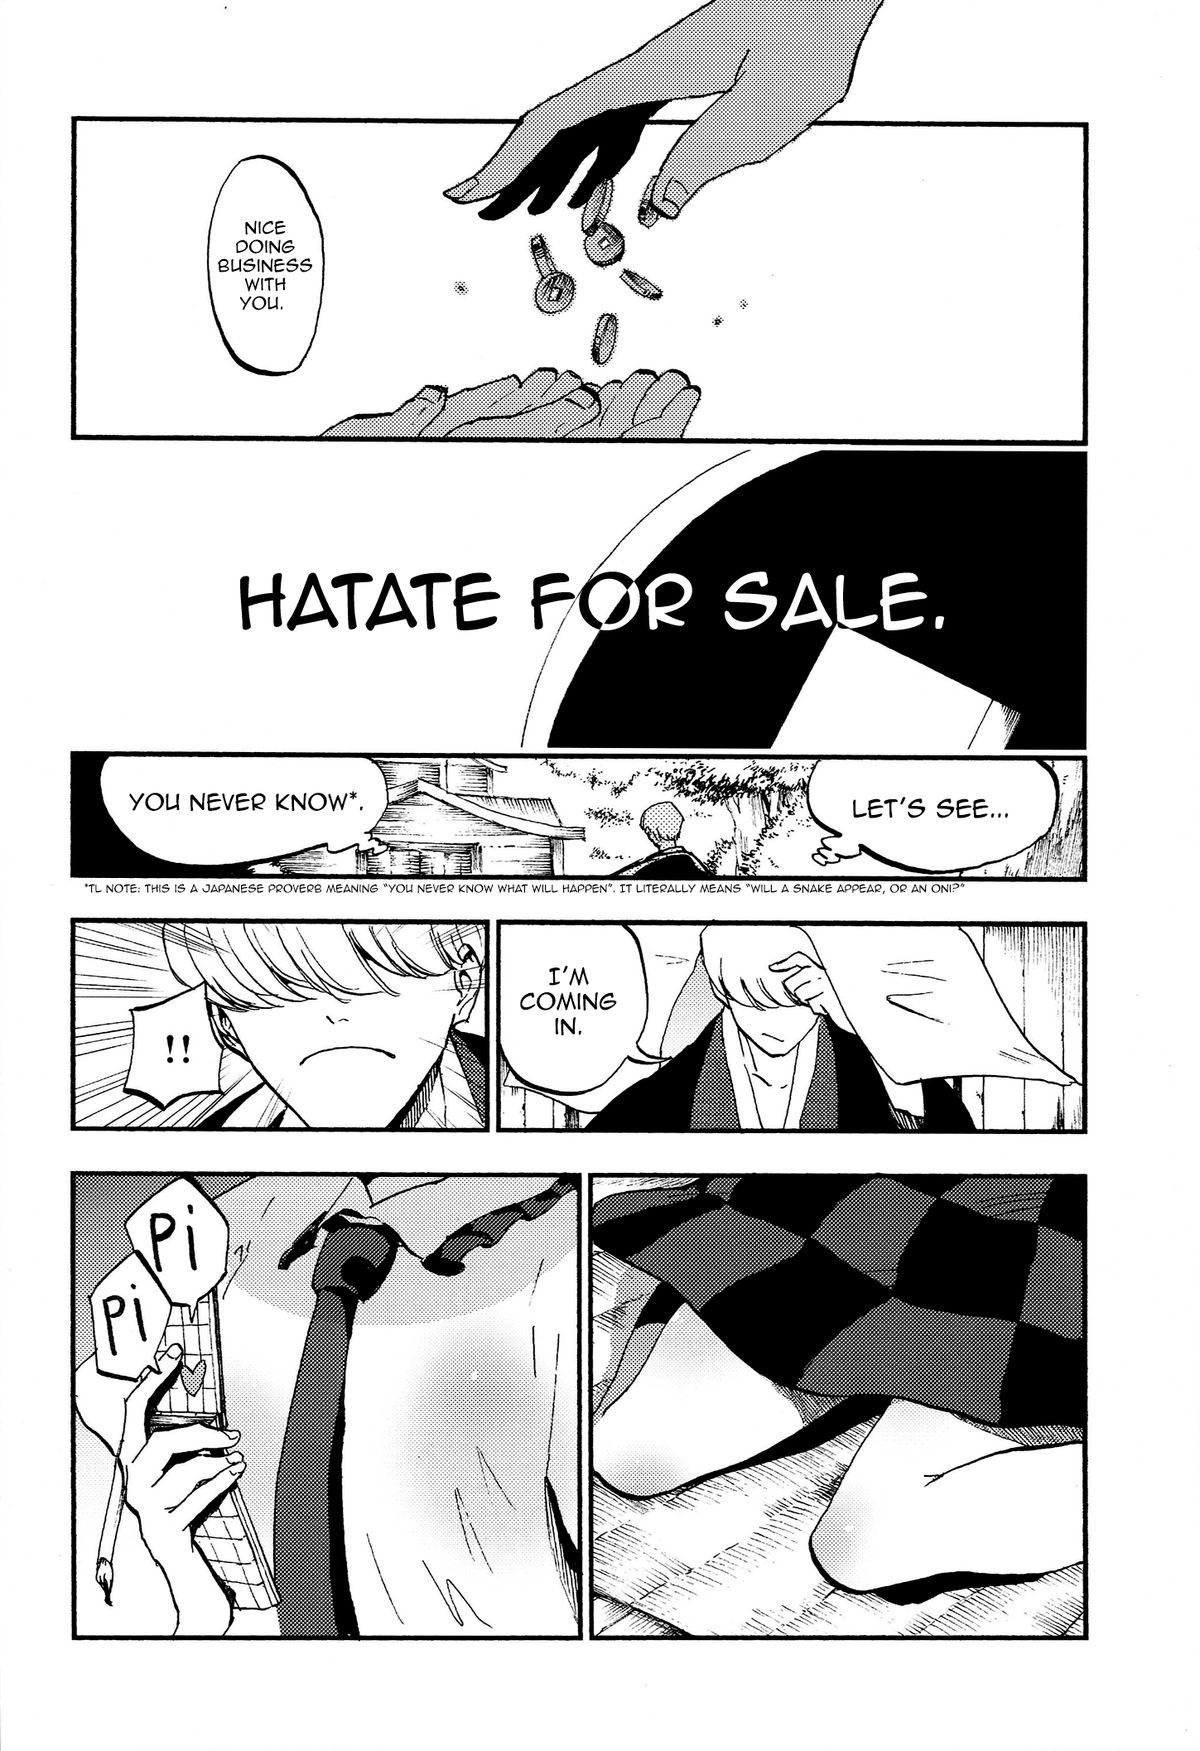 Outdoor Hatate Urimasu | Hatate For Sale - Touhou project 18yearsold - Page 4